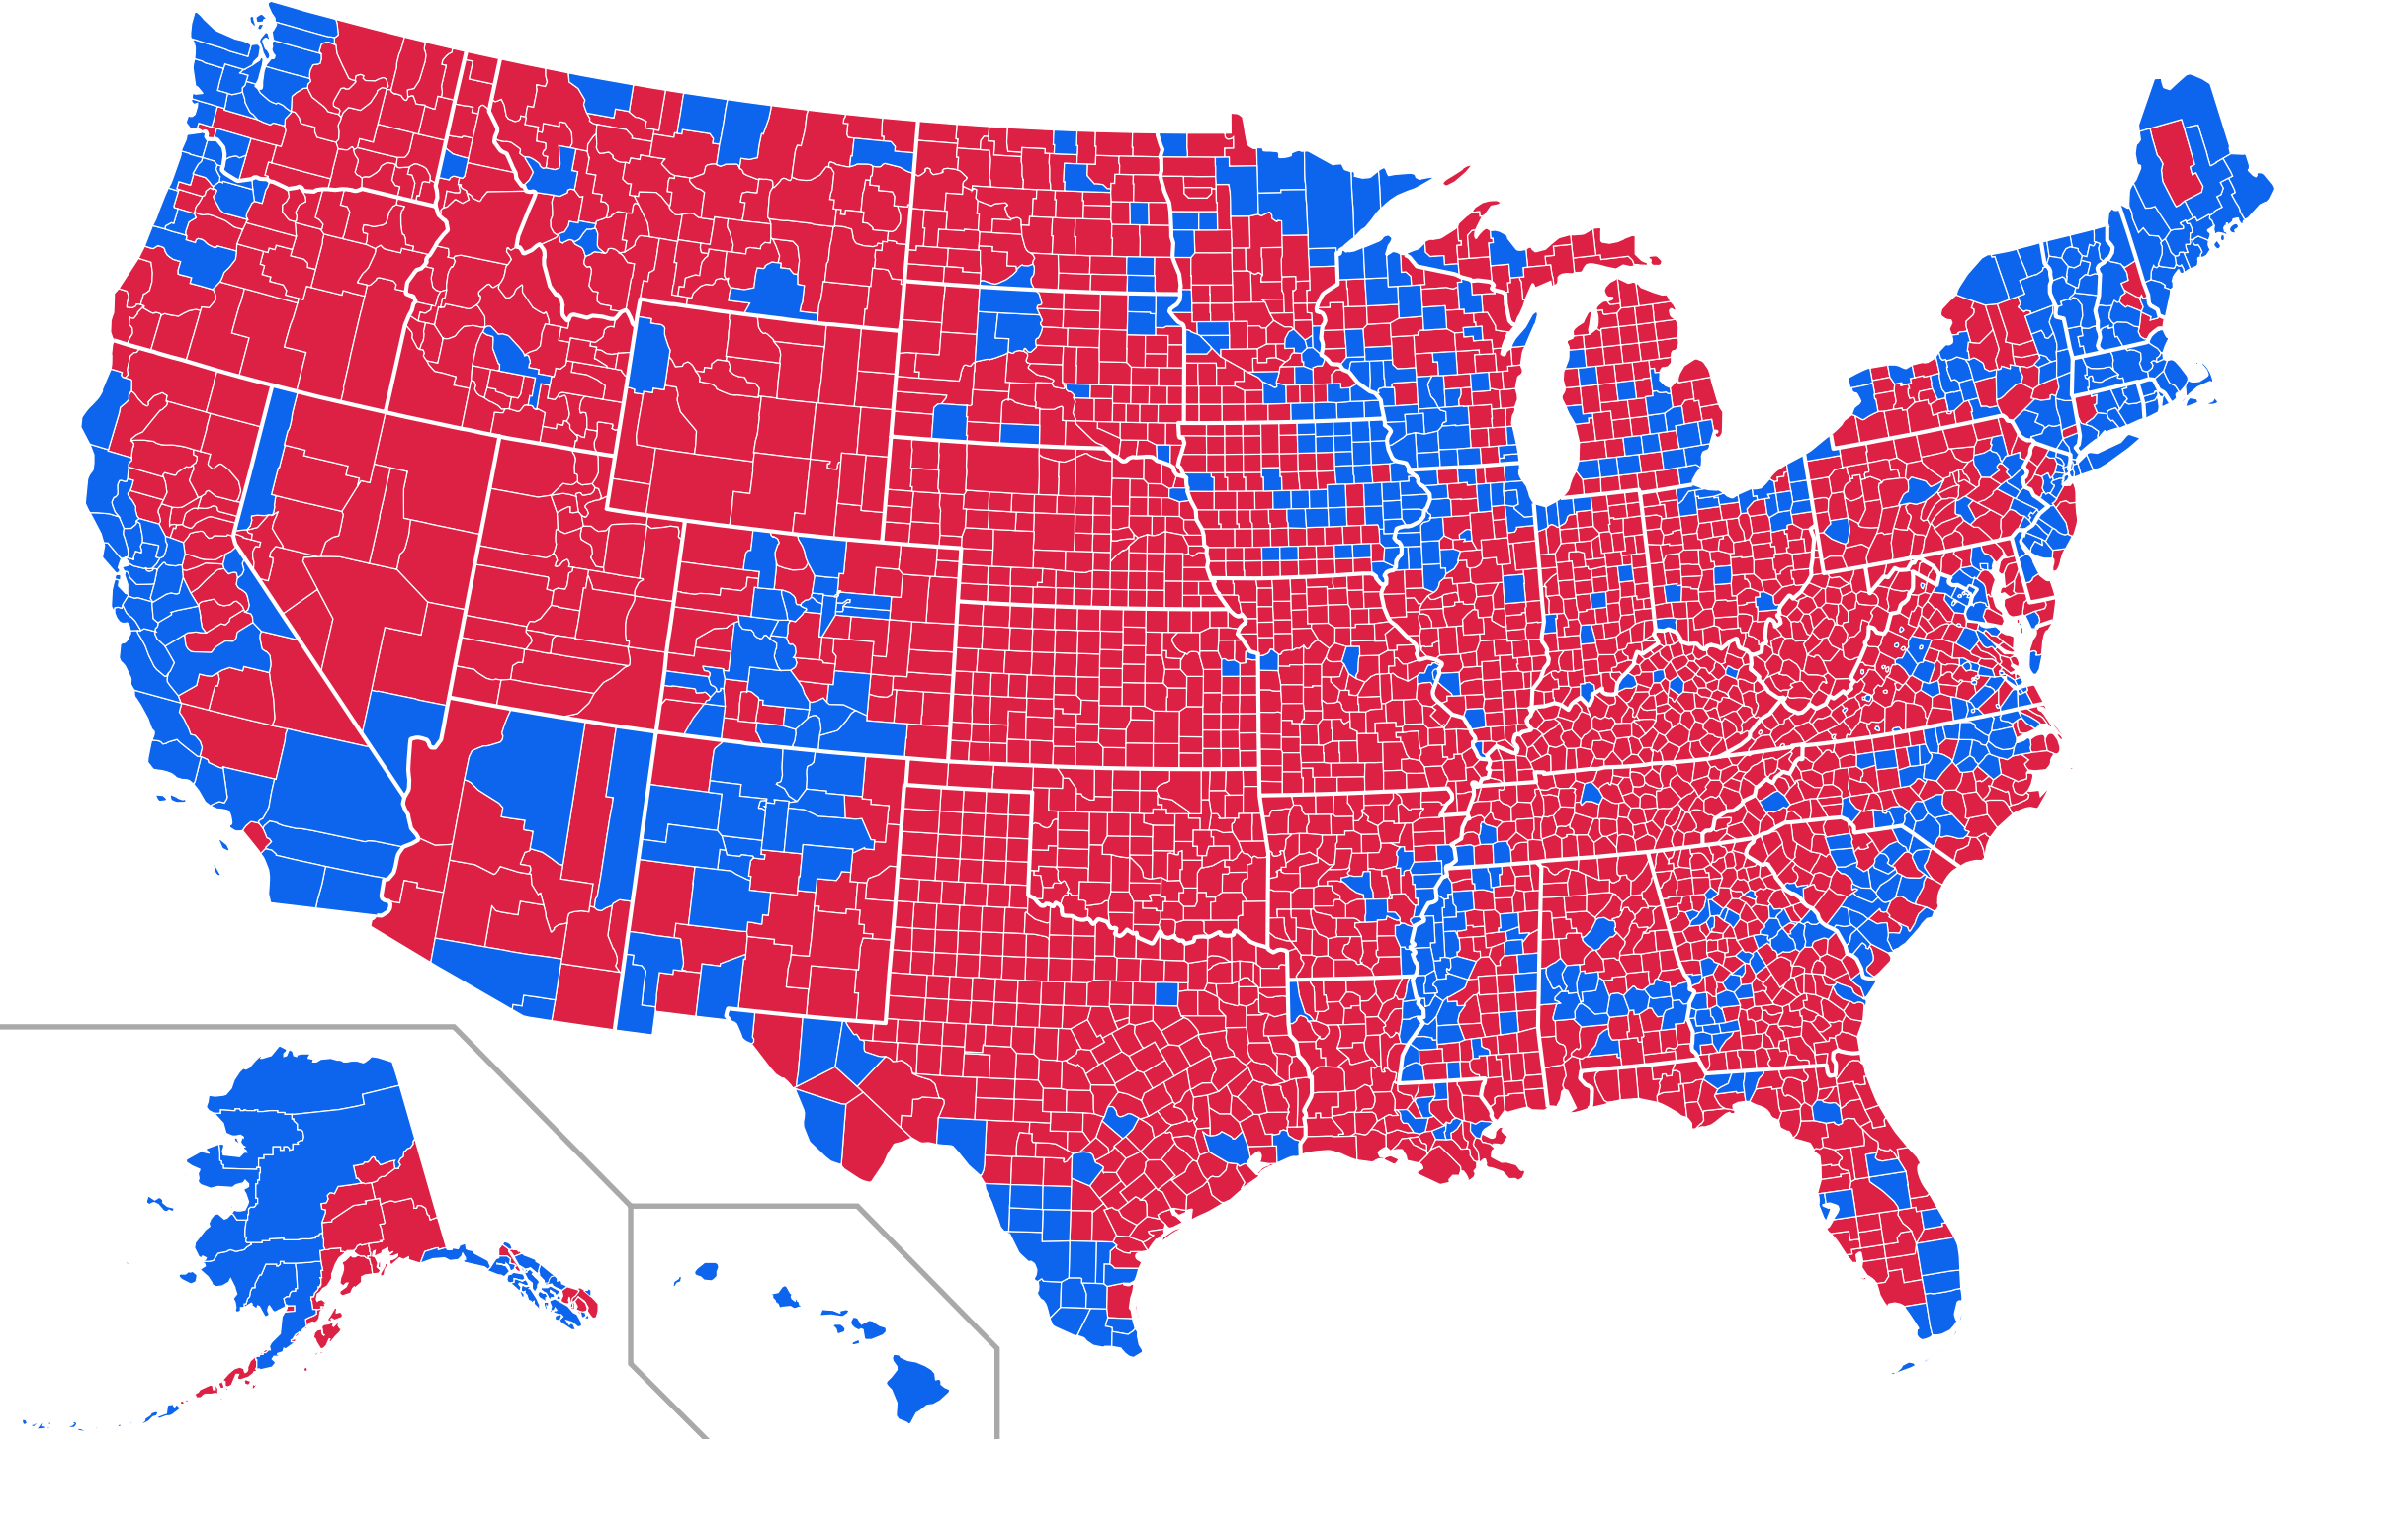 2012 US election results maps of different kinds.